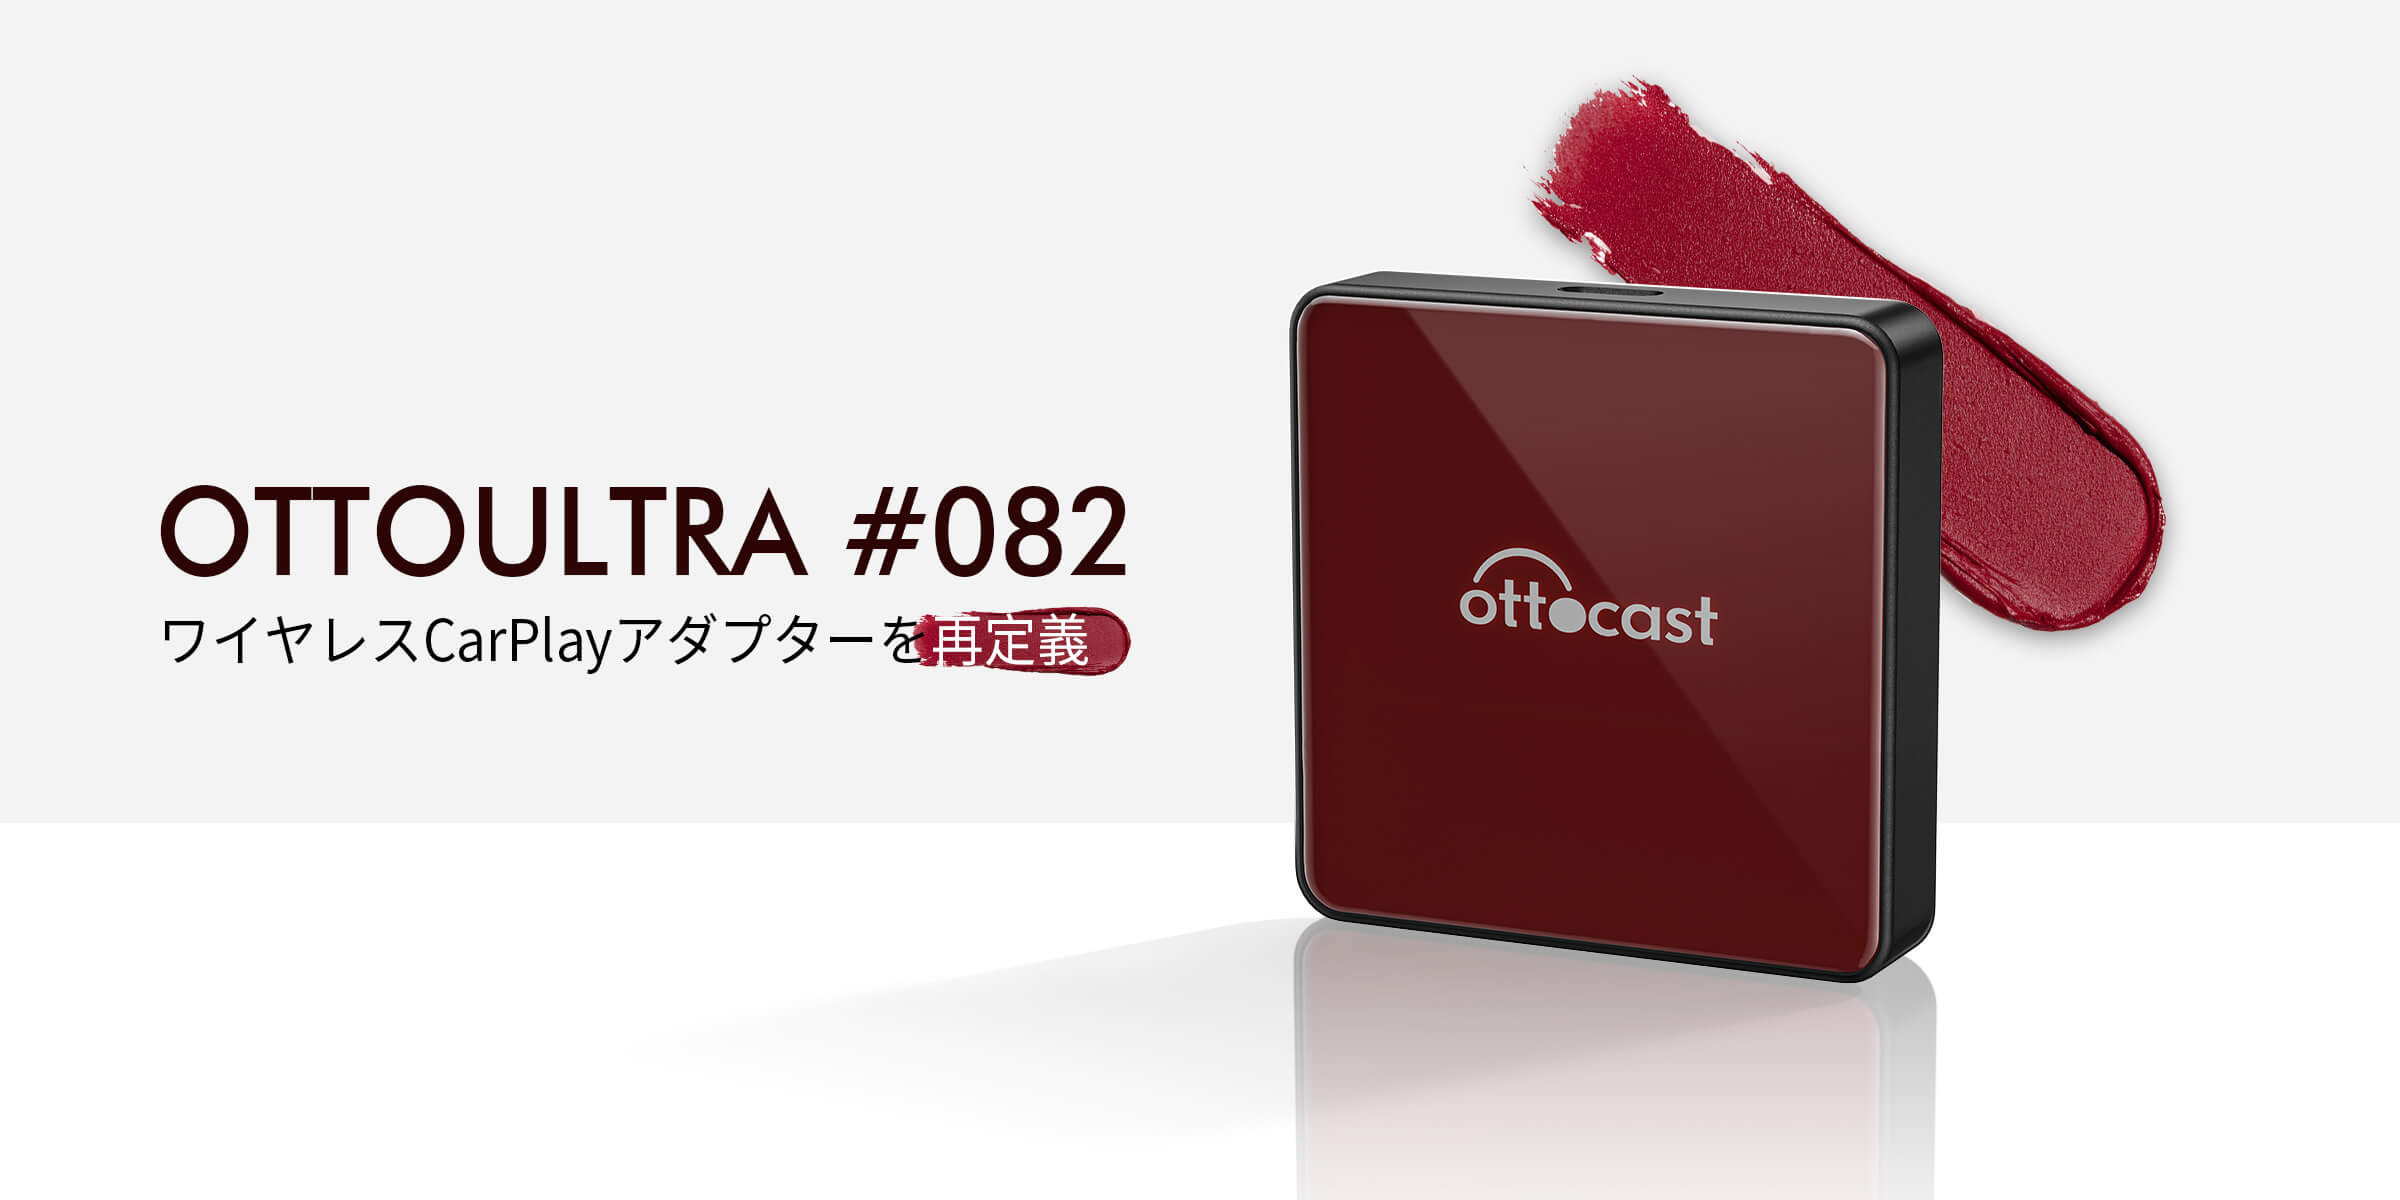 The official website exclusively sells the OTTOULTRA #082 Wireless